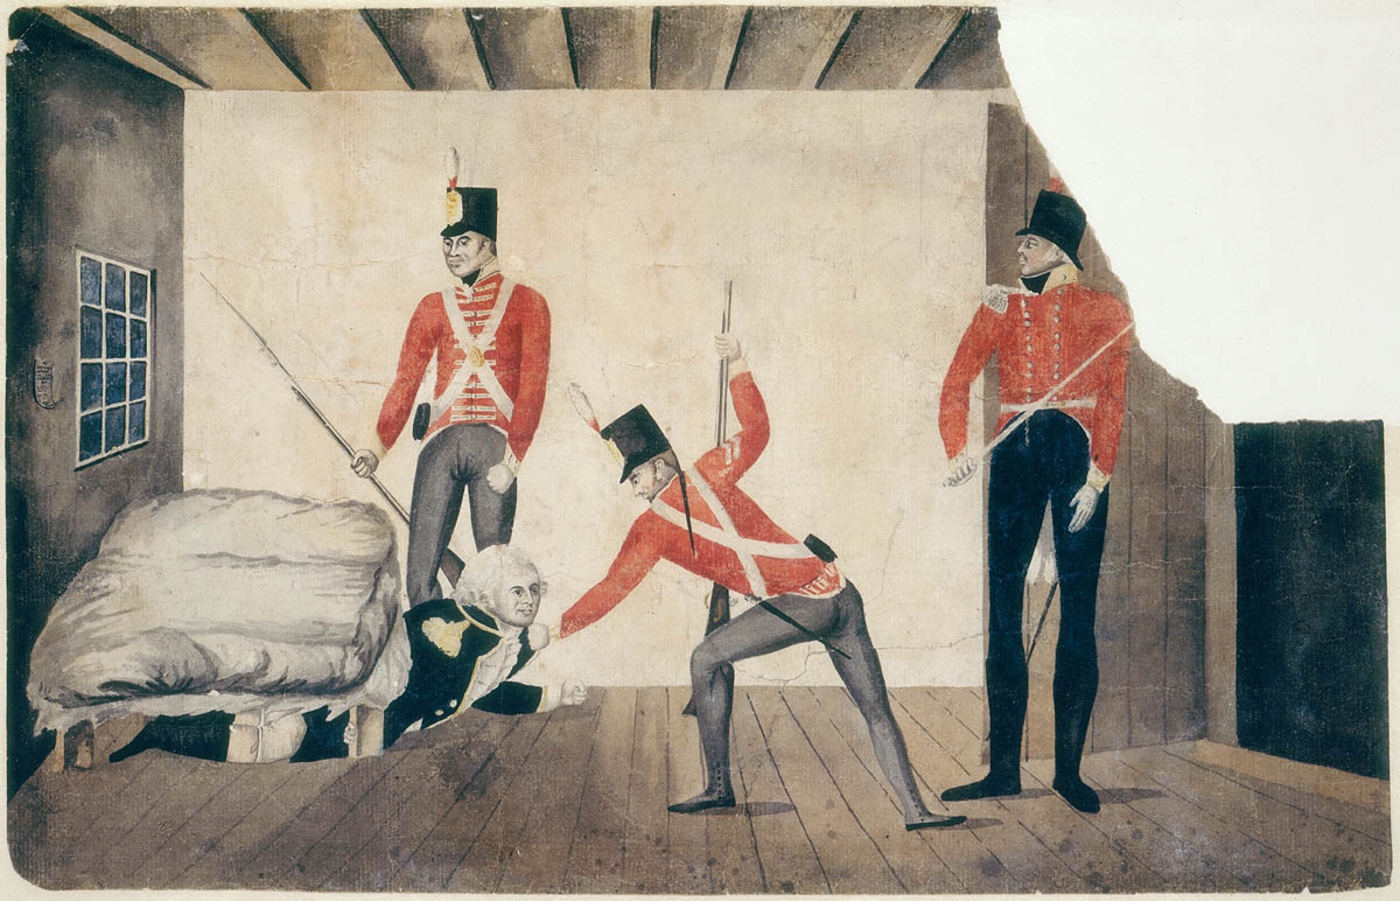 The arrest of Governor Bligh 1808, State Library of NSW